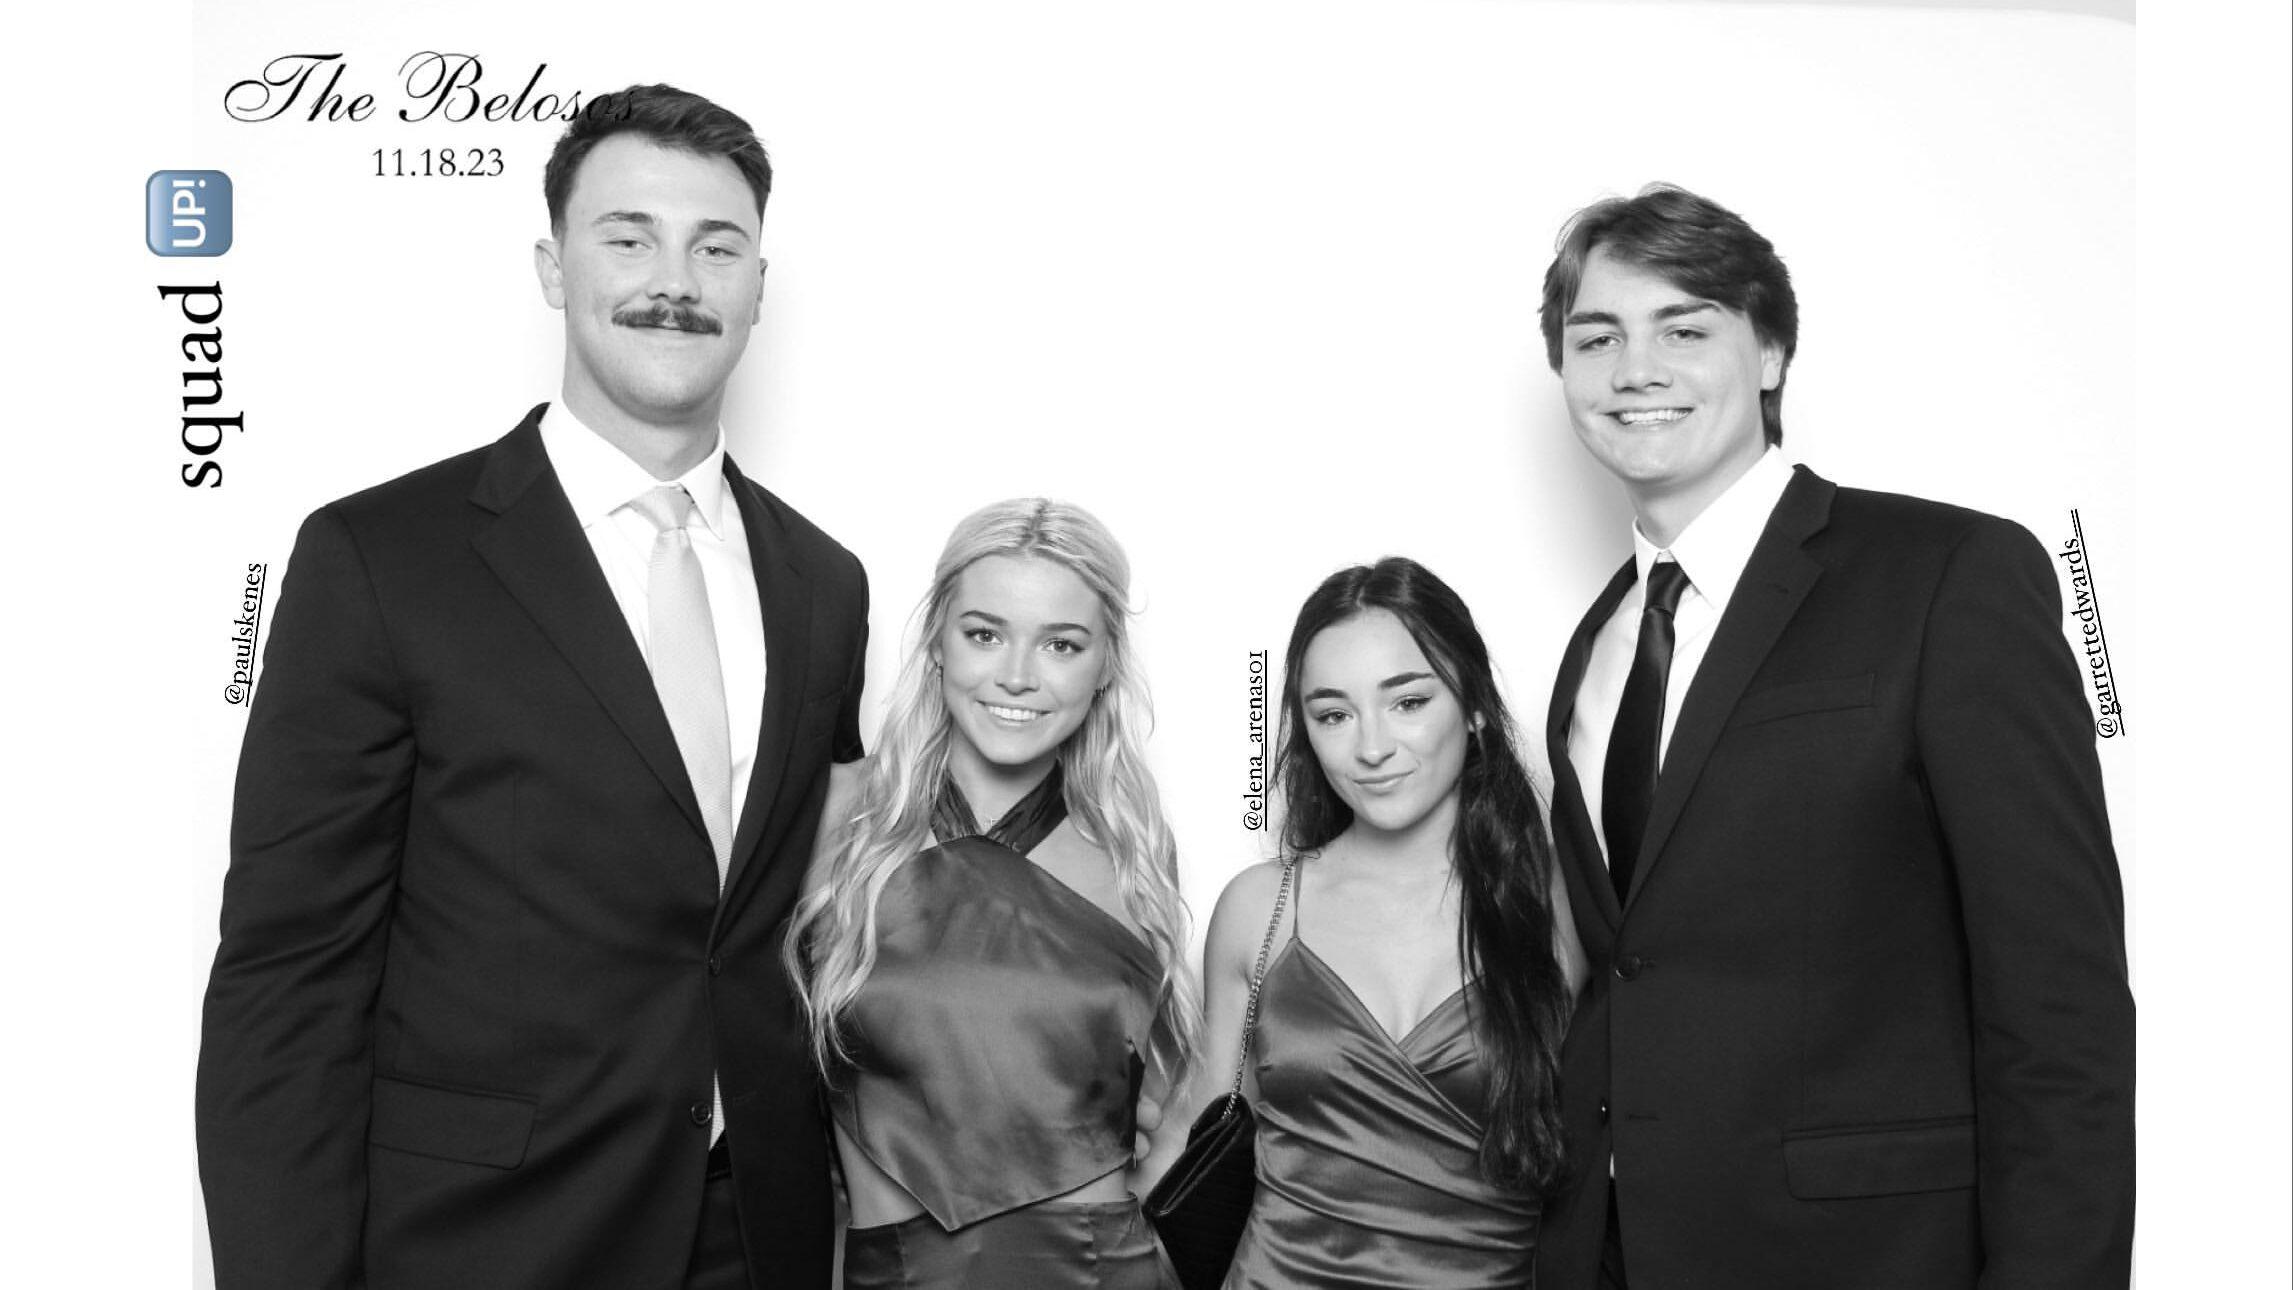 Olivia Dunne, Paul Skenes, Elena Arenas, and Garrett Edwards pose for a picture while attending a wedding.